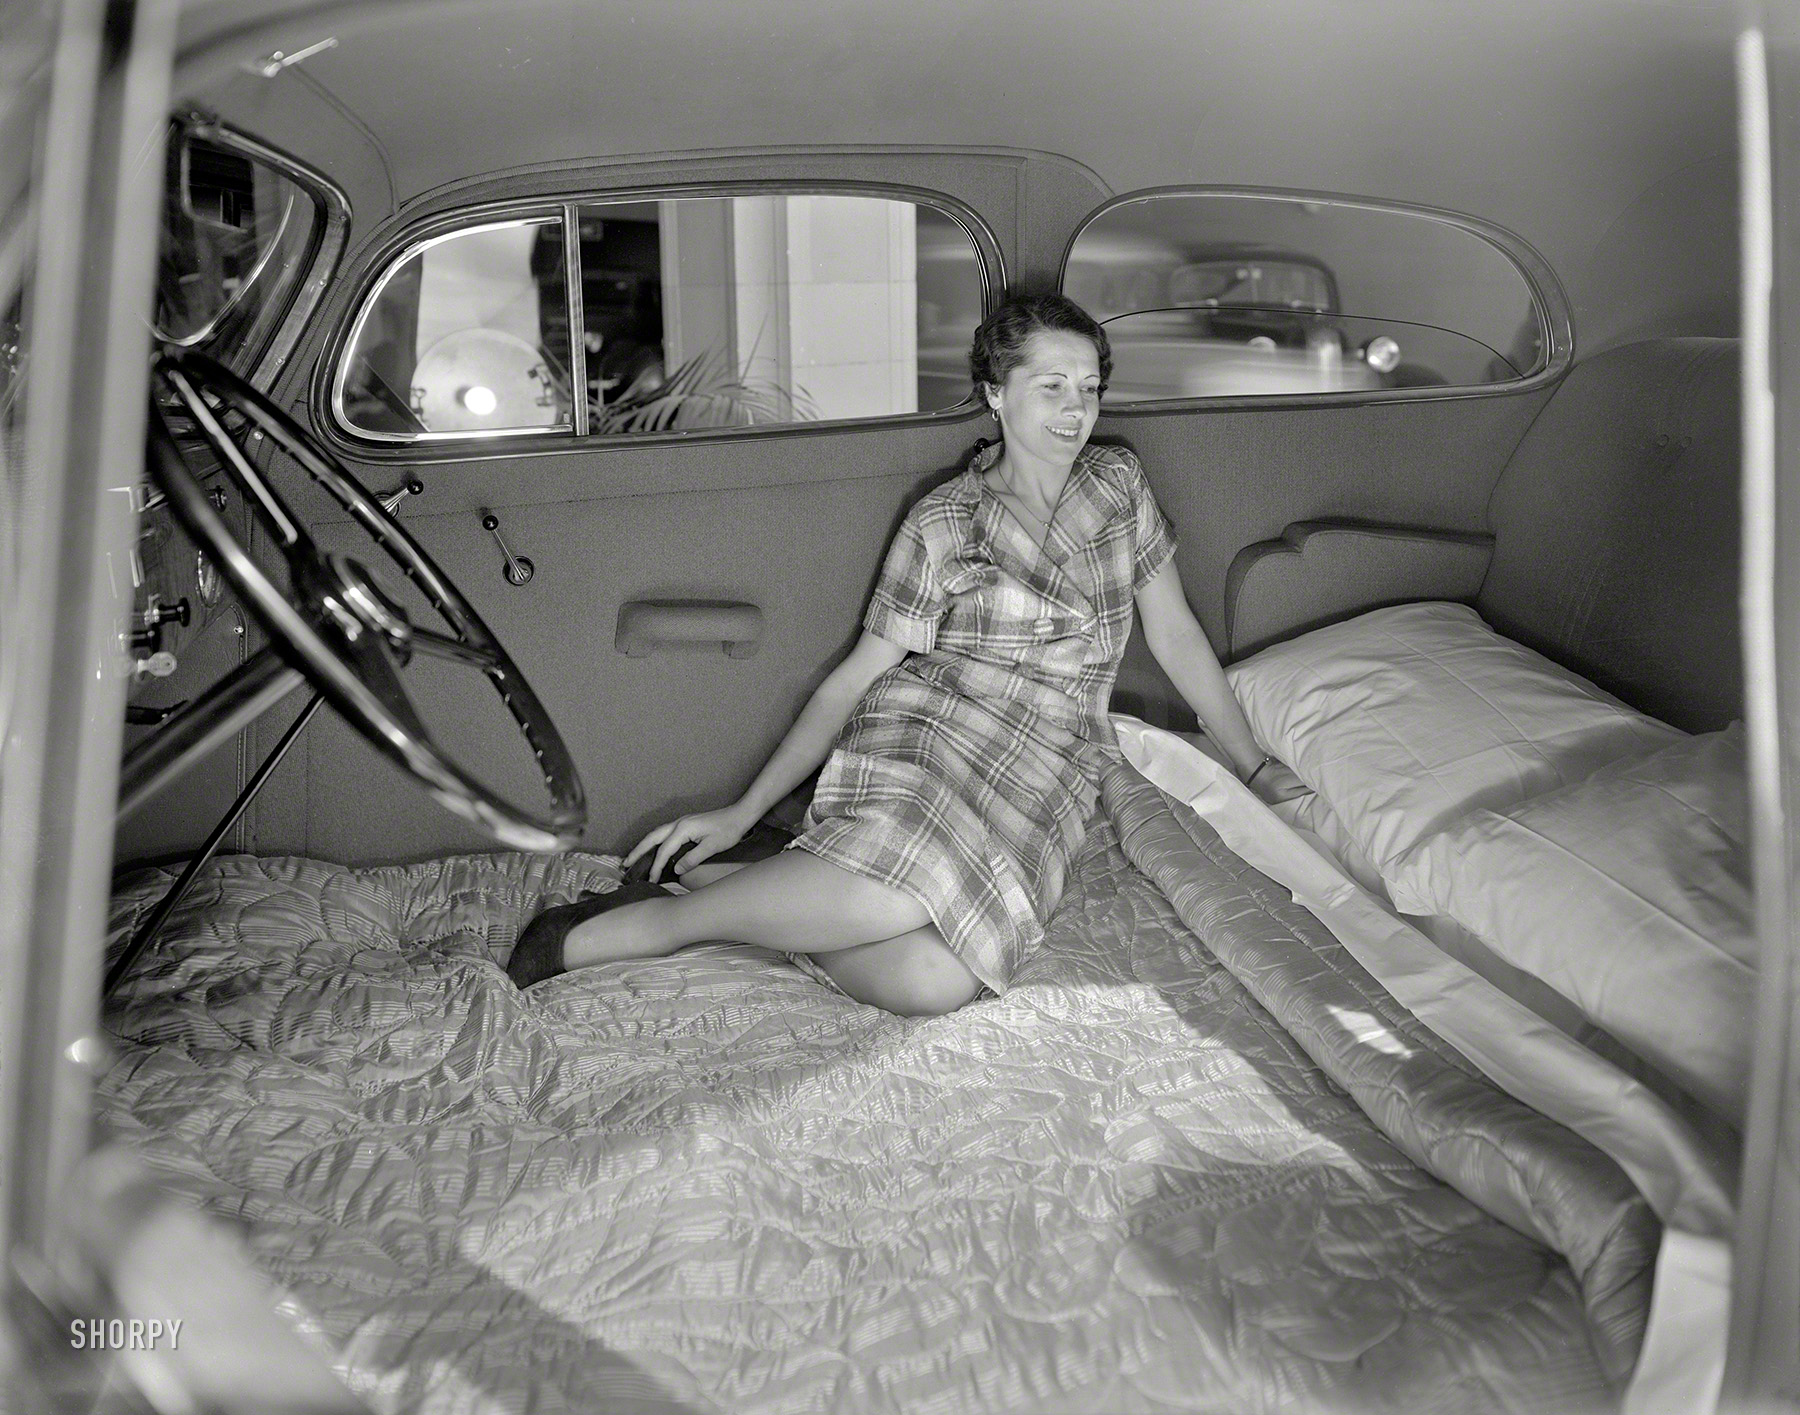 June 3, 1936. San Francisco. "Woman in Pontiac made into bed." Some cars are just better at stopping than going. 8x10 nitrate negative. View full size.